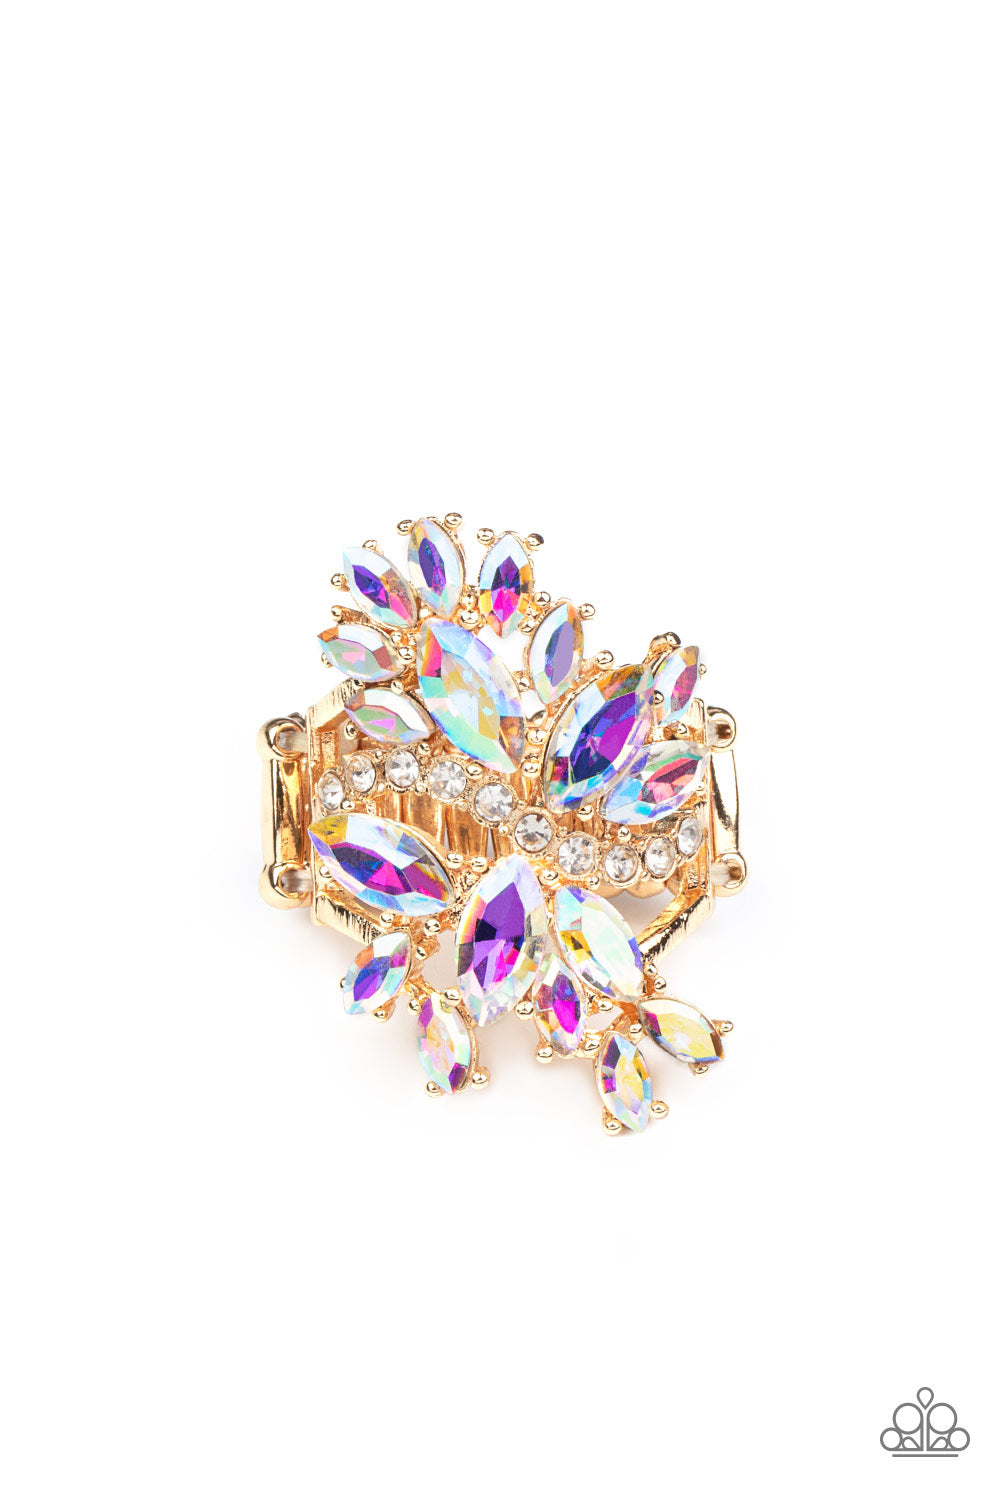 Paparazzi Accessories - Flauntable Flare - Gold Ring